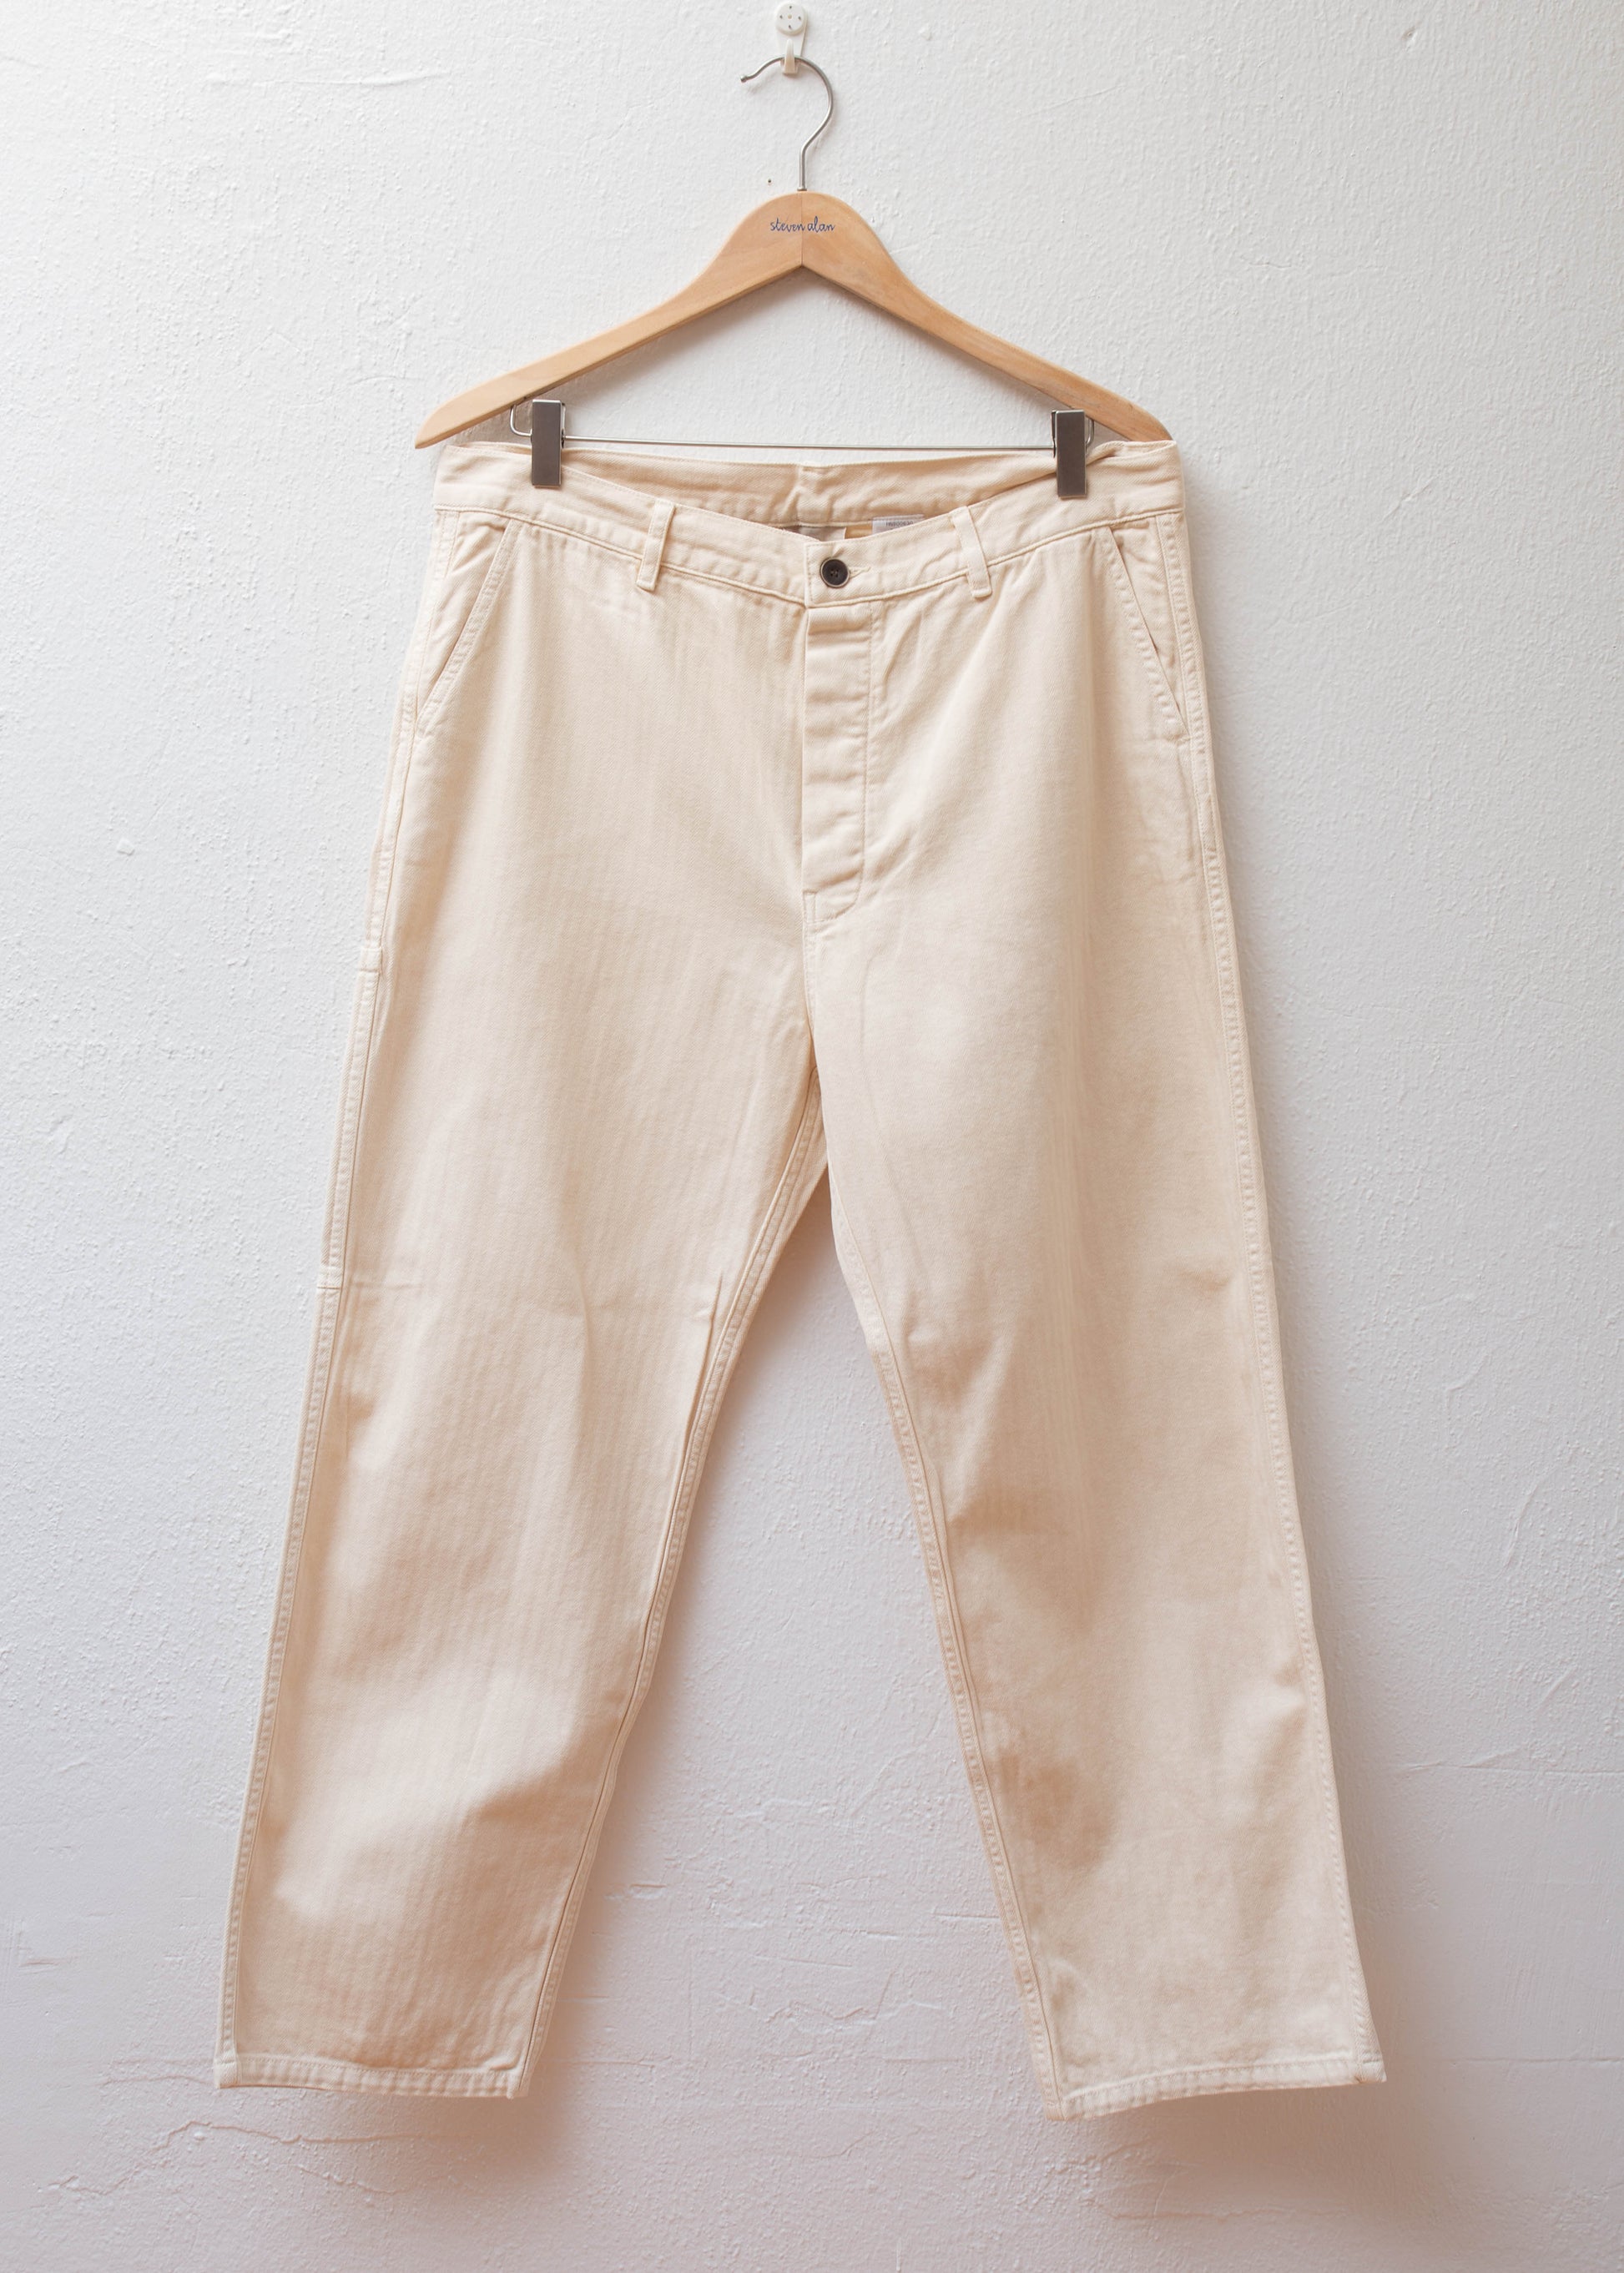 Herringbone Over Dye Pants color Ivory hanging on white wall 